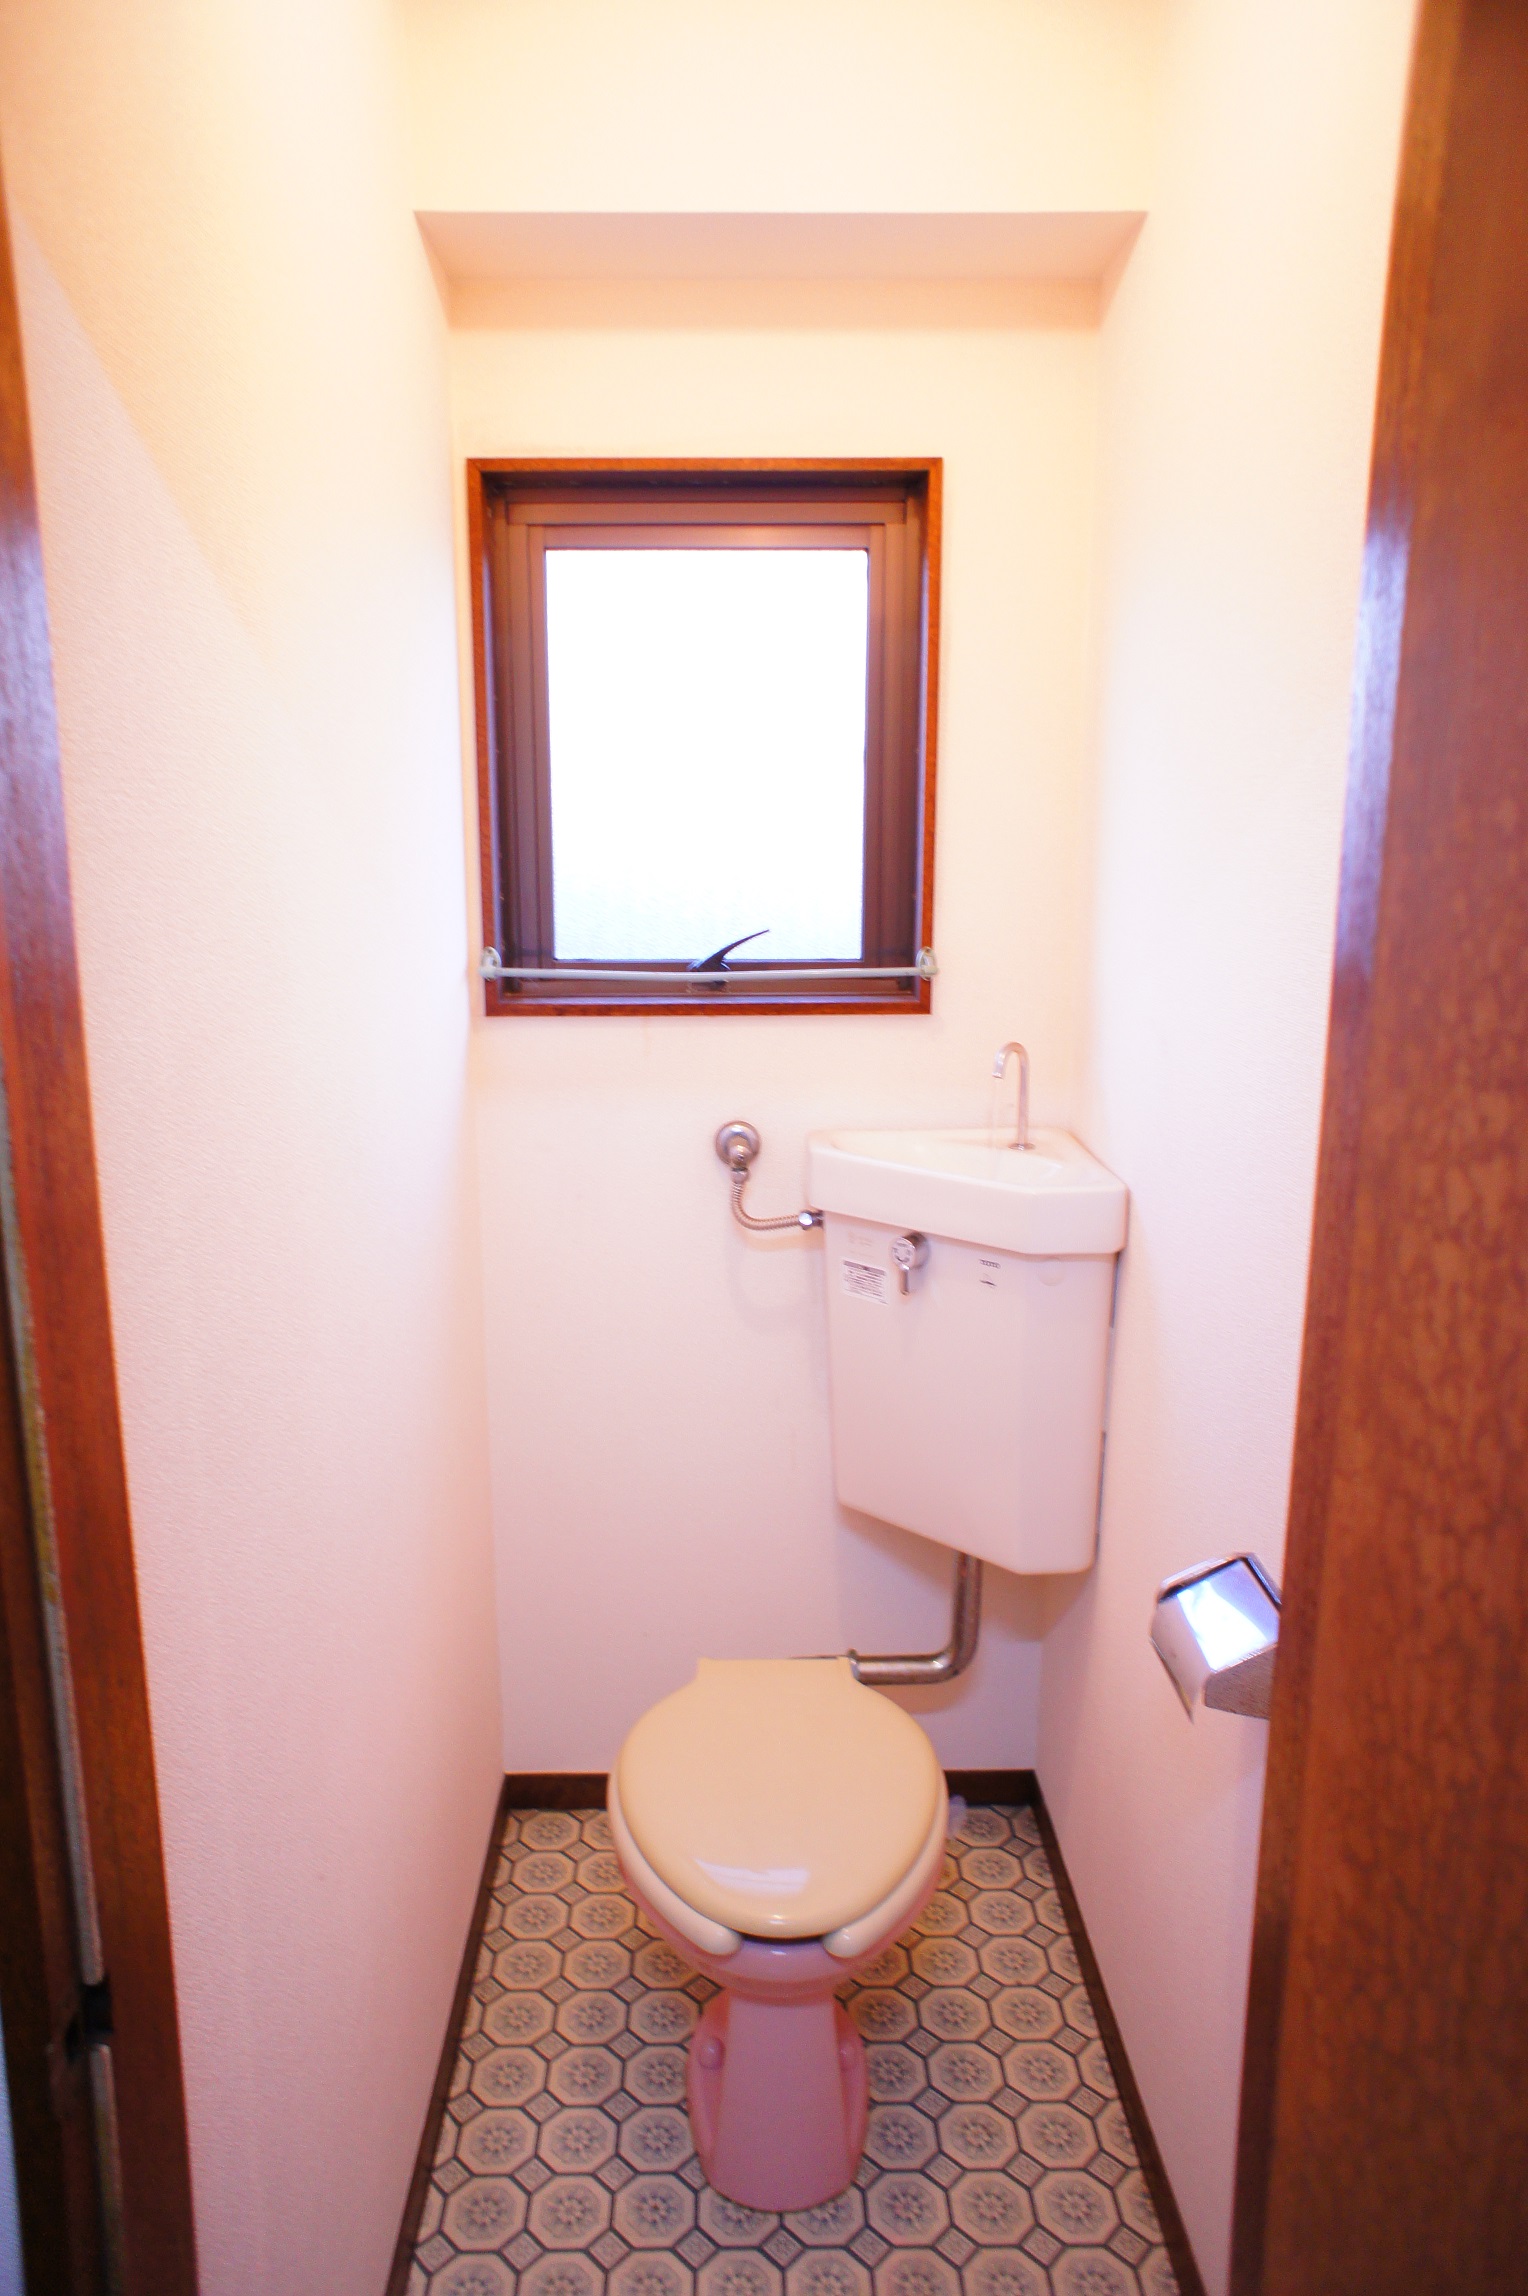 Toilet. Restroom with a convenient window to ventilation